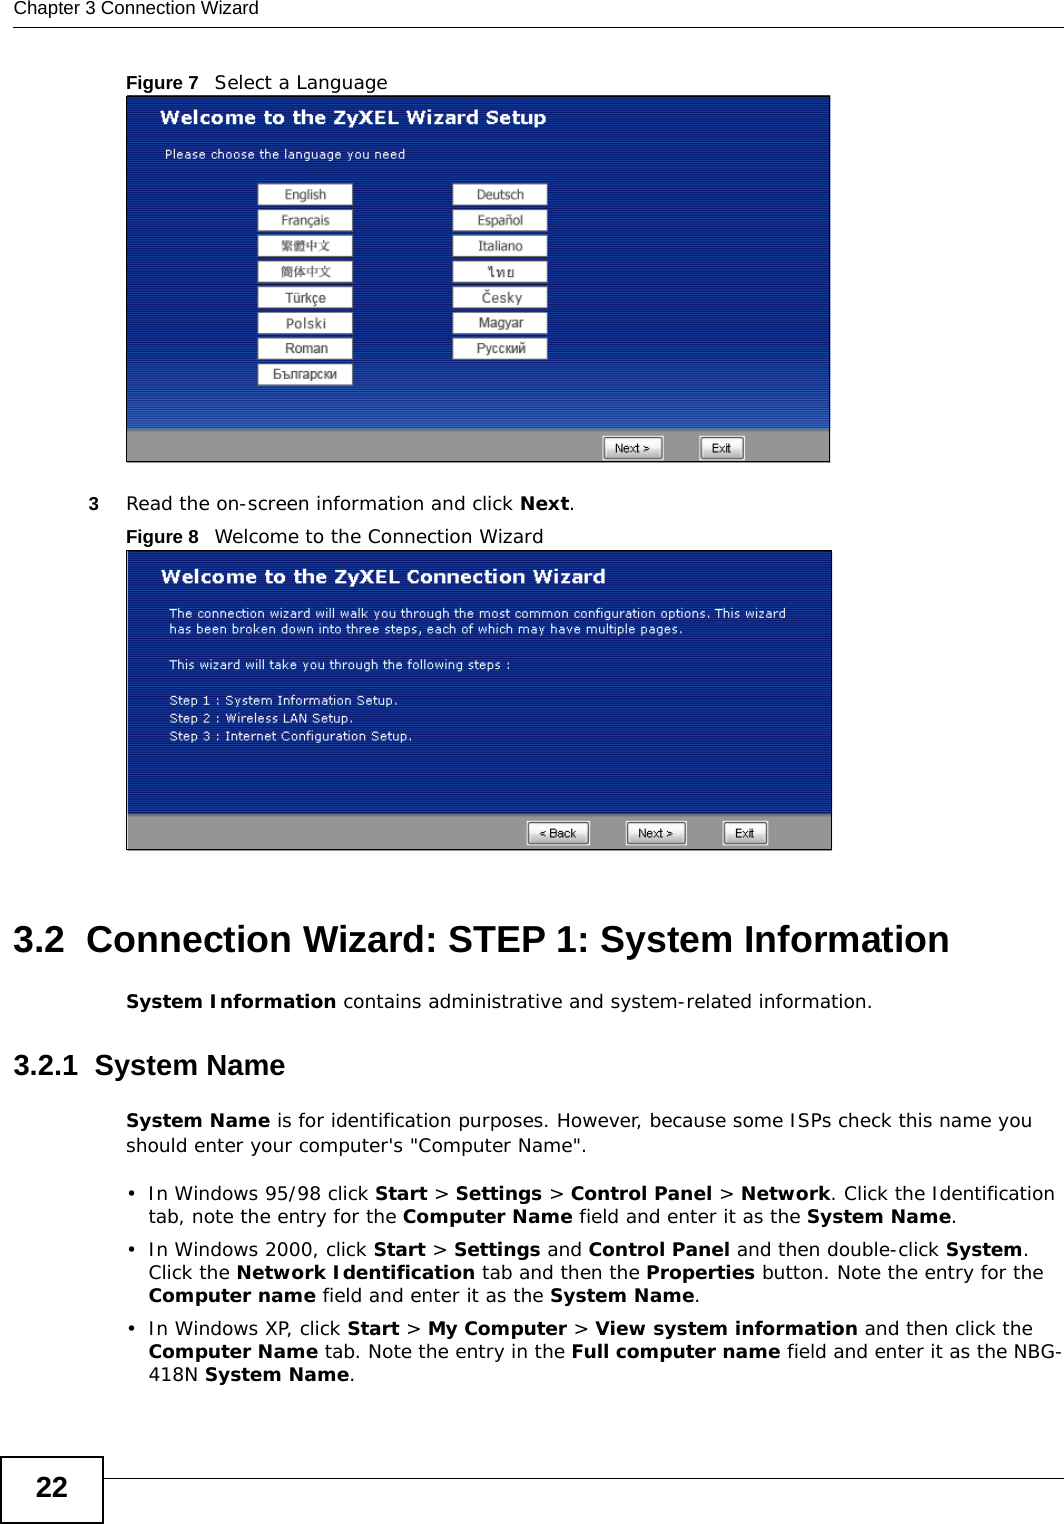 Chapter 3 Connection Wizard22Figure 7   Select a Language3Read the on-screen information and click Next.Figure 8   Welcome to the Connection Wizard3.2  Connection Wizard: STEP 1: System InformationSystem Information contains administrative and system-related information.3.2.1  System NameSystem Name is for identification purposes. However, because some ISPs check this name you should enter your computer&apos;s &quot;Computer Name&quot;. • In Windows 95/98 click Start &gt; Settings &gt; Control Panel &gt; Network. Click the Identification tab, note the entry for the Computer Name field and enter it as the System Name.• In Windows 2000, click Start &gt; Settings and Control Panel and then double-click System. Click the Network Identification tab and then the Properties button. Note the entry for the Computer name field and enter it as the System Name.• In Windows XP, click Start &gt; My Computer &gt; View system information and then click the Computer Name tab. Note the entry in the Full computer name field and enter it as the NBG-418N System Name.